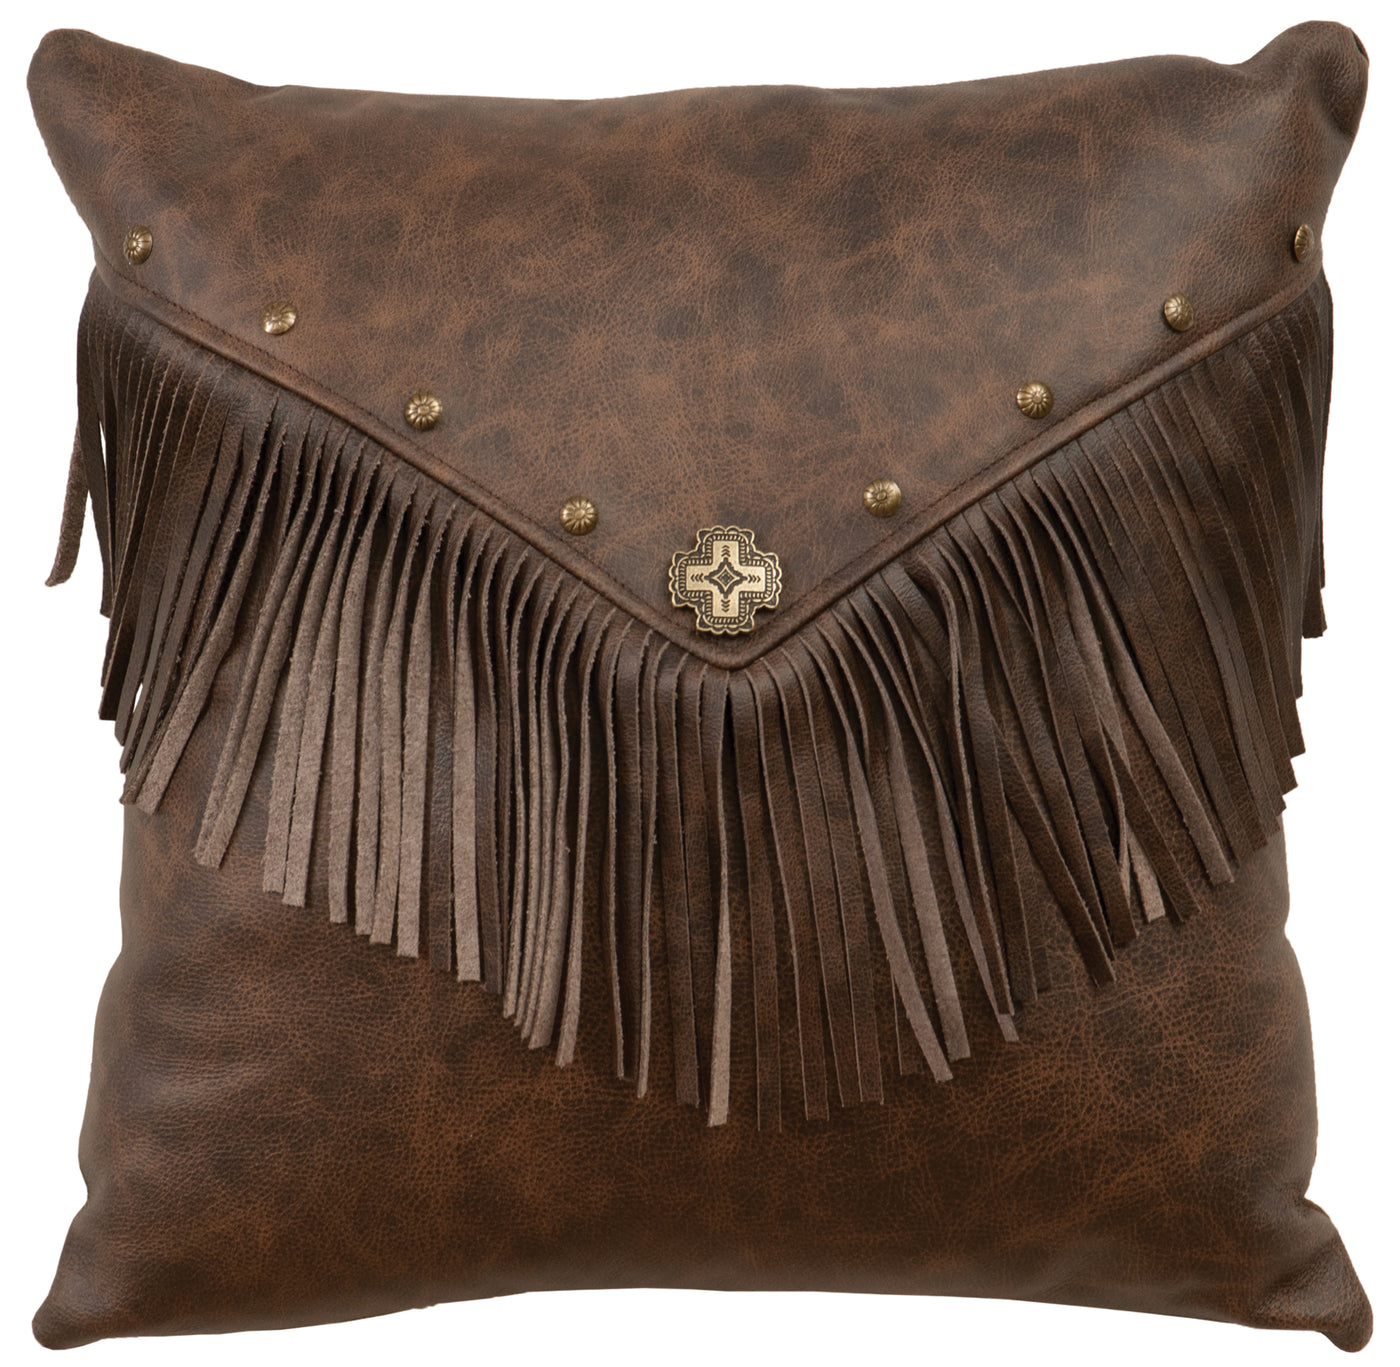 Canvello Leather Pillow 16x16 - Fabric Back